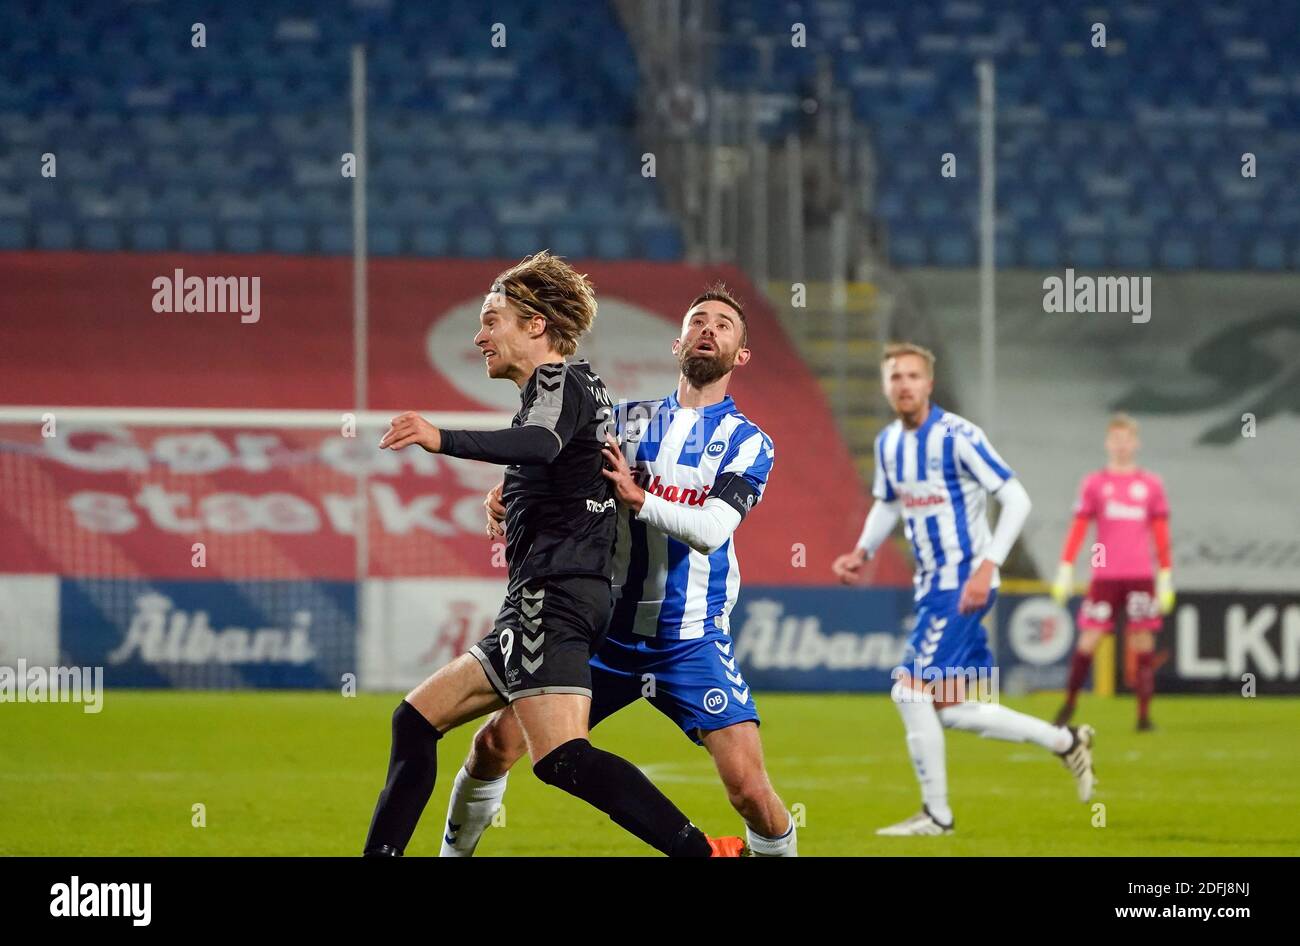 Odense, Denmark. 04th Dec, 2020. Janus Drachmann (8) of OB and Tom van  Weert (9) of AAB seen during the 3F Superliga match between Odense Boldklub  and Aalborg Boldklub at Nature Energy